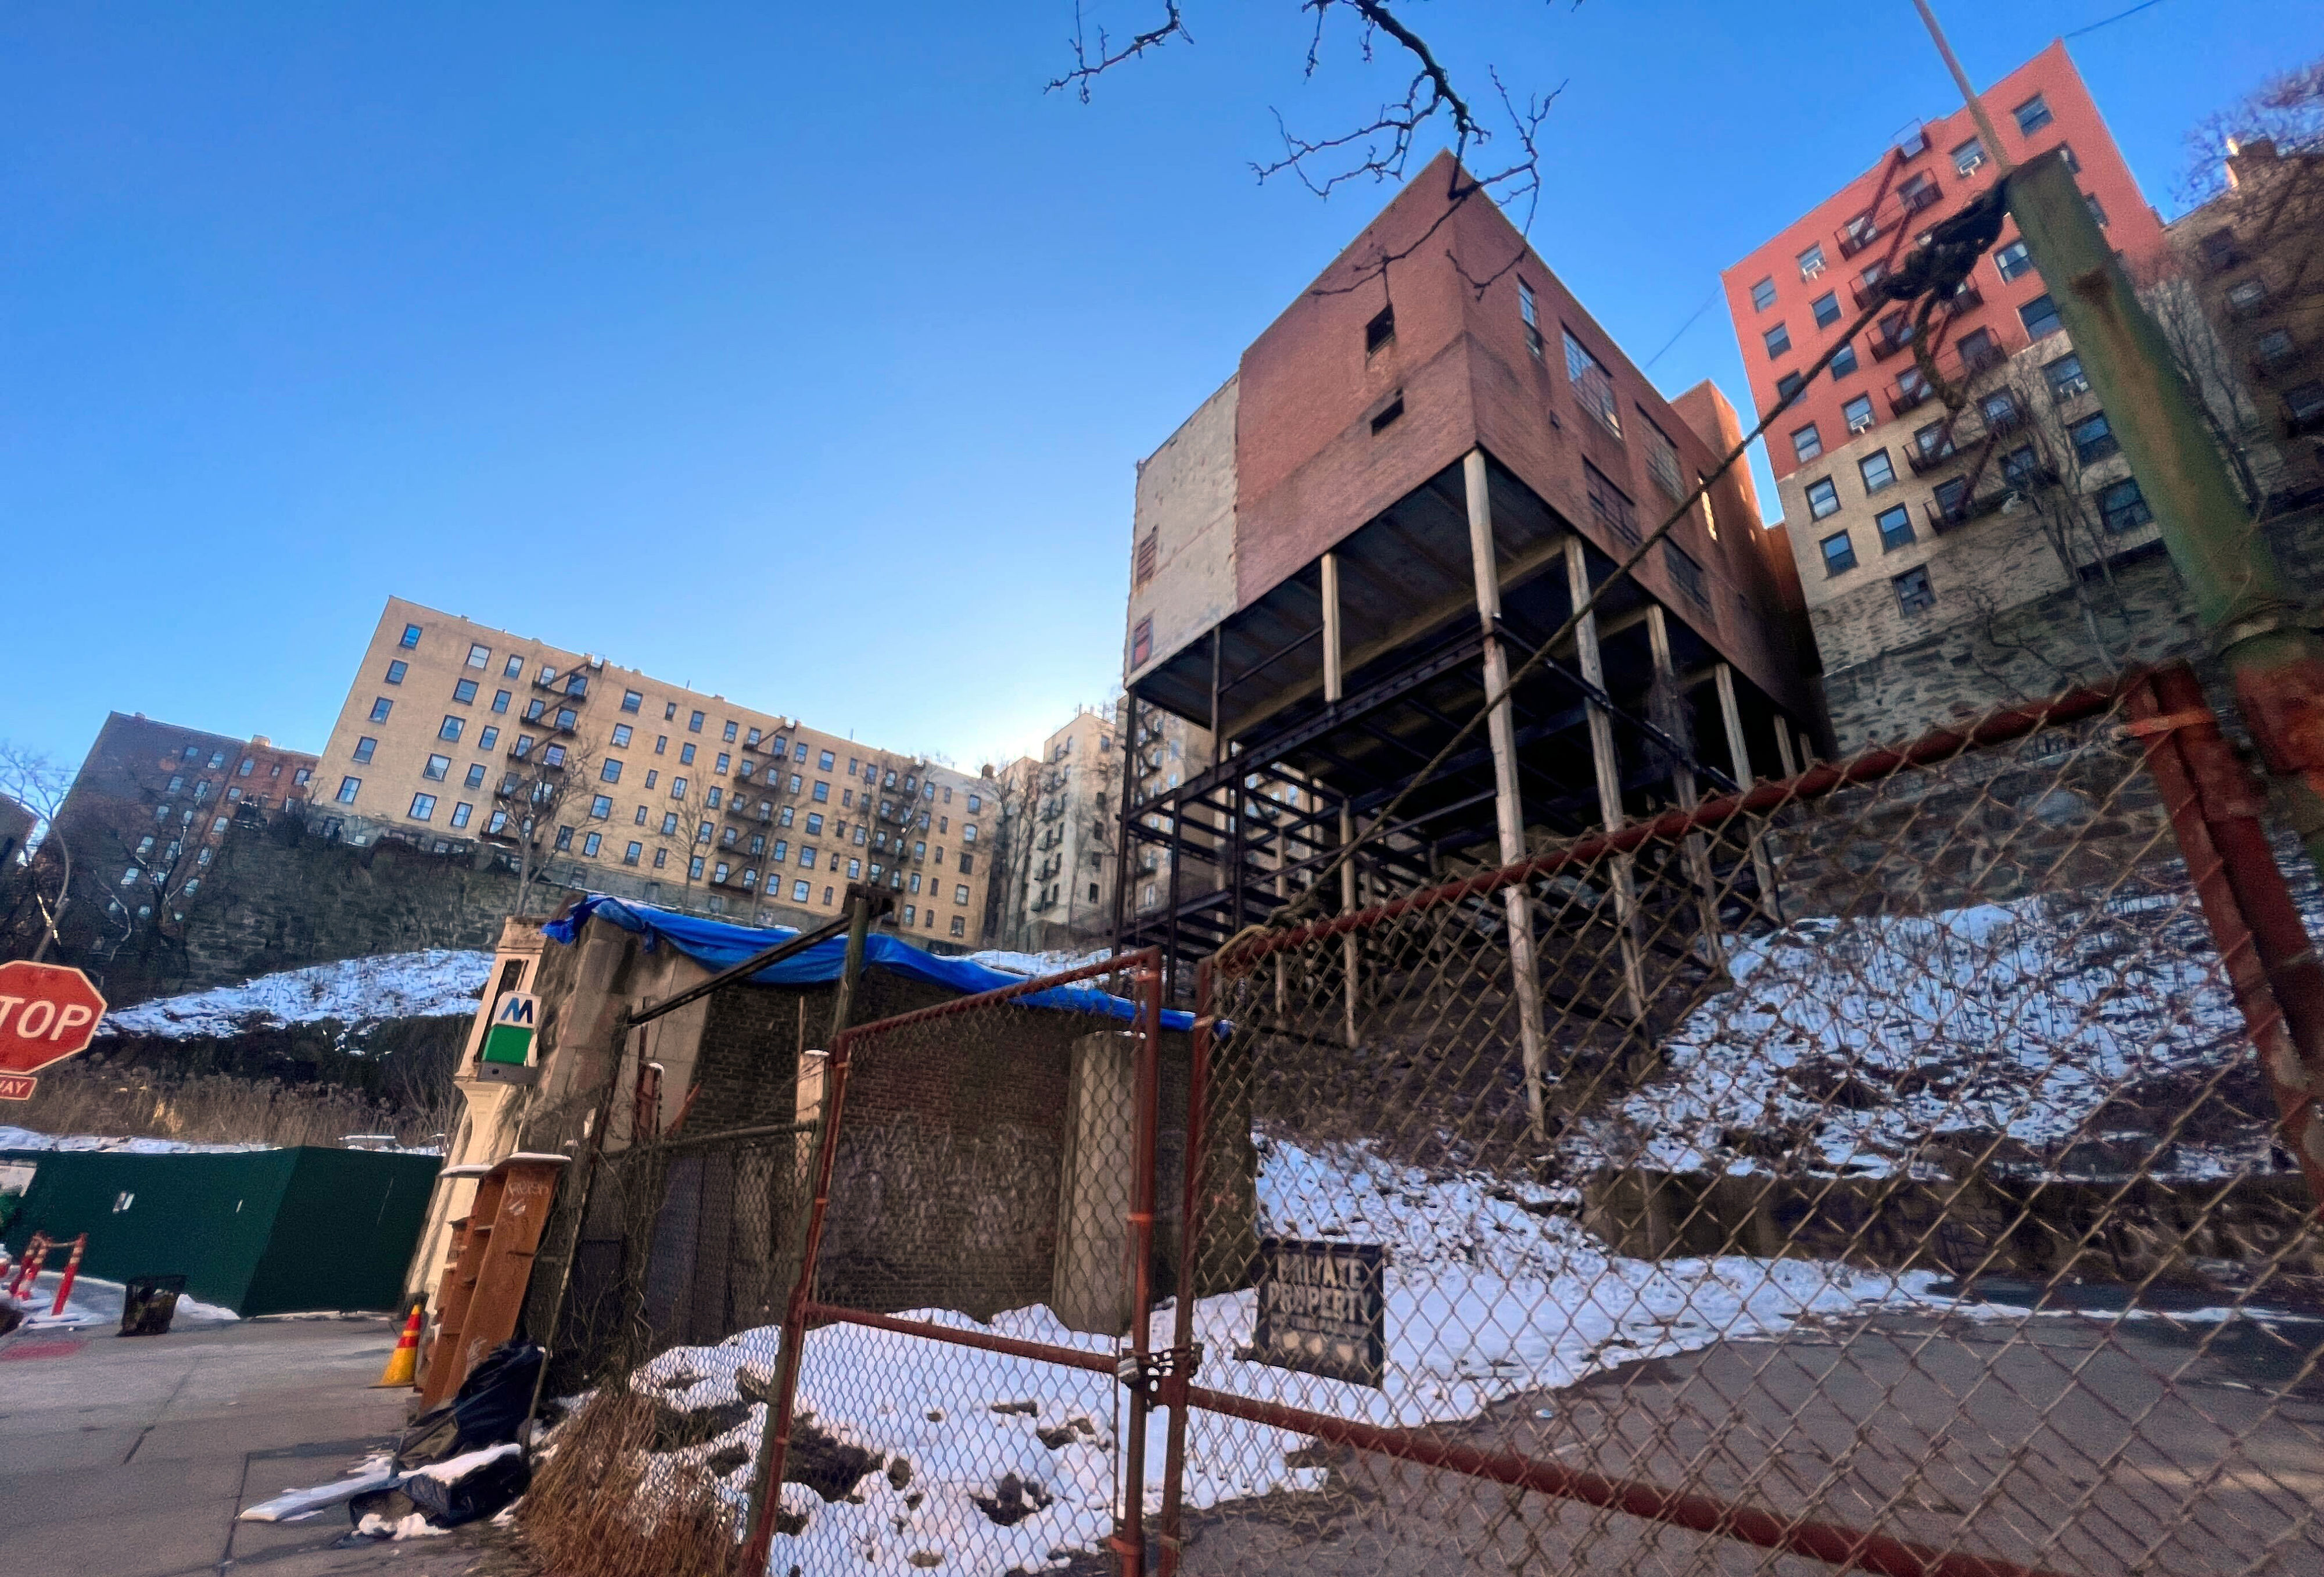 after years of delays, a planned 23-story apartment tower in washington heights moves forward